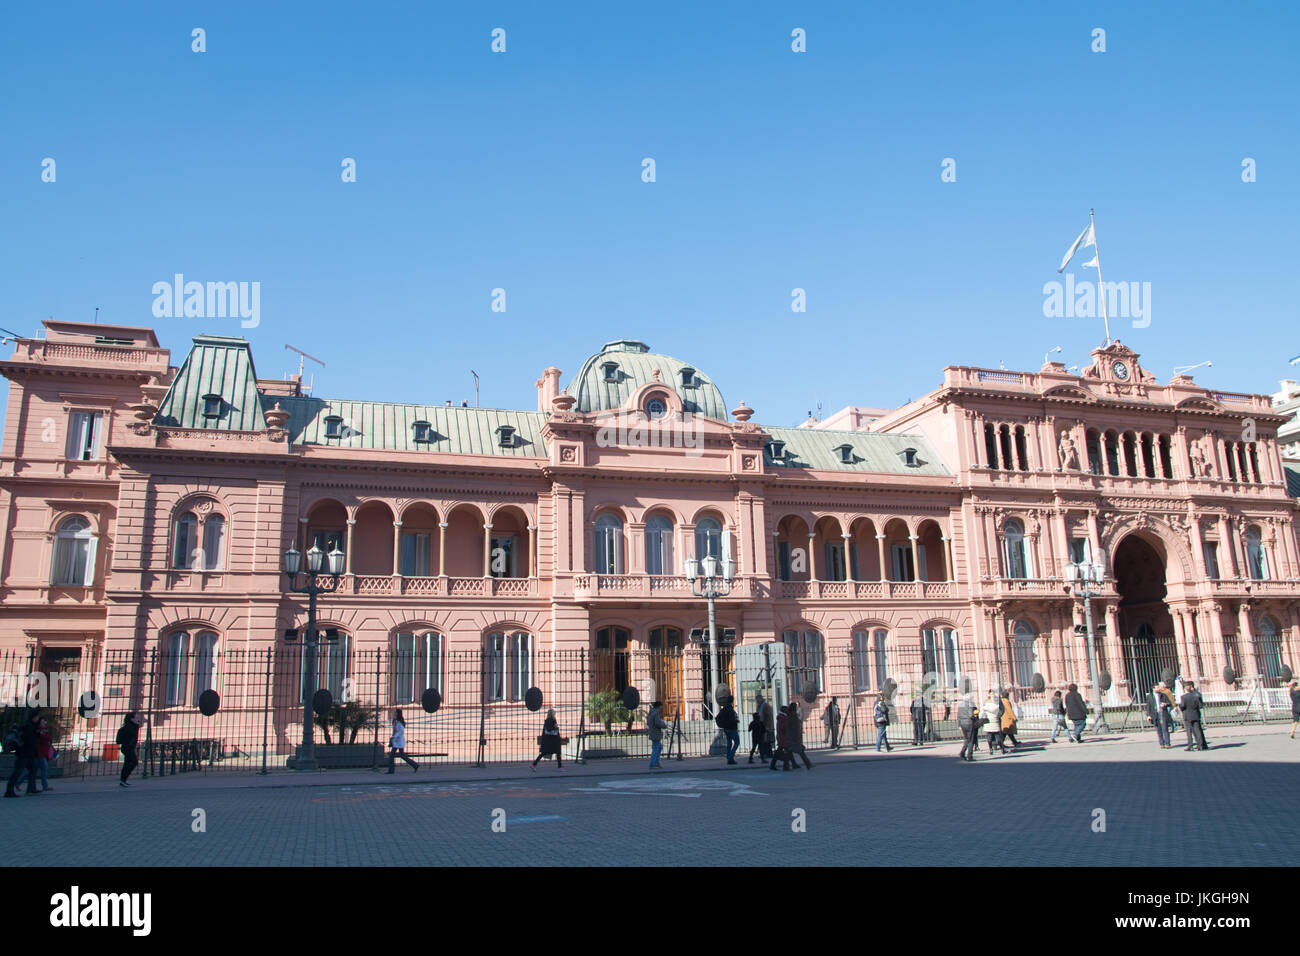 BUENOS AIRES, ARGENTINE - JULY 18, 2017:  Casa Rosada (pink house) Buenos Aires Argentina.La Casa Rosada is the official seat of the executive branch  Stock Photo